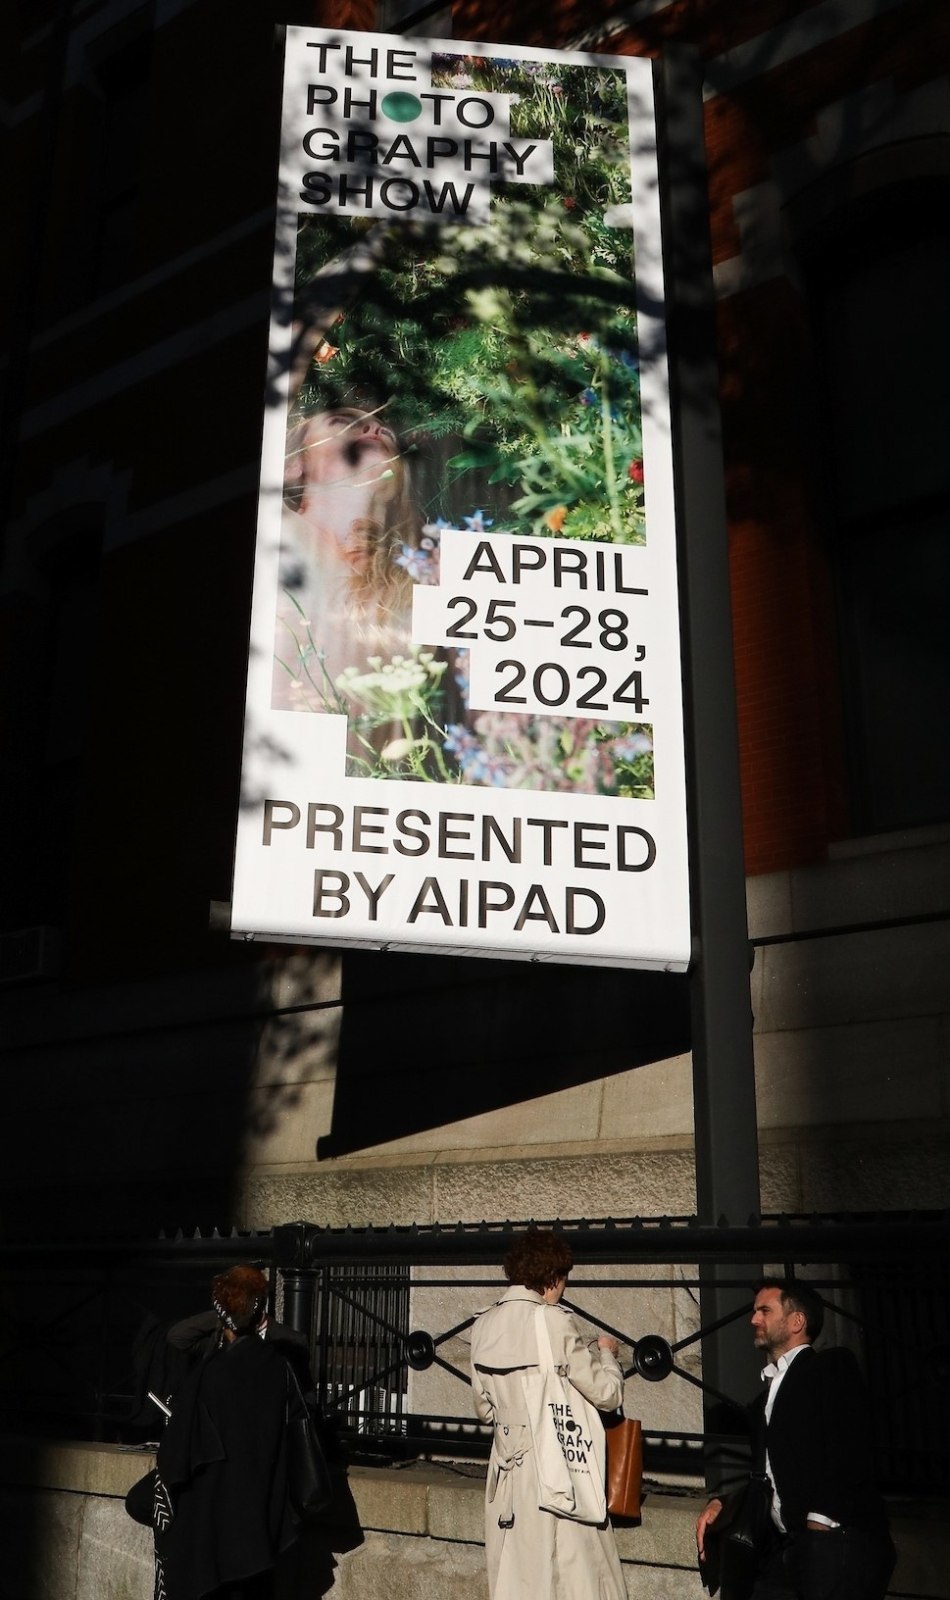 The show banner is lit by the sun through dappling trees while people stand outside The Photography Show 2024